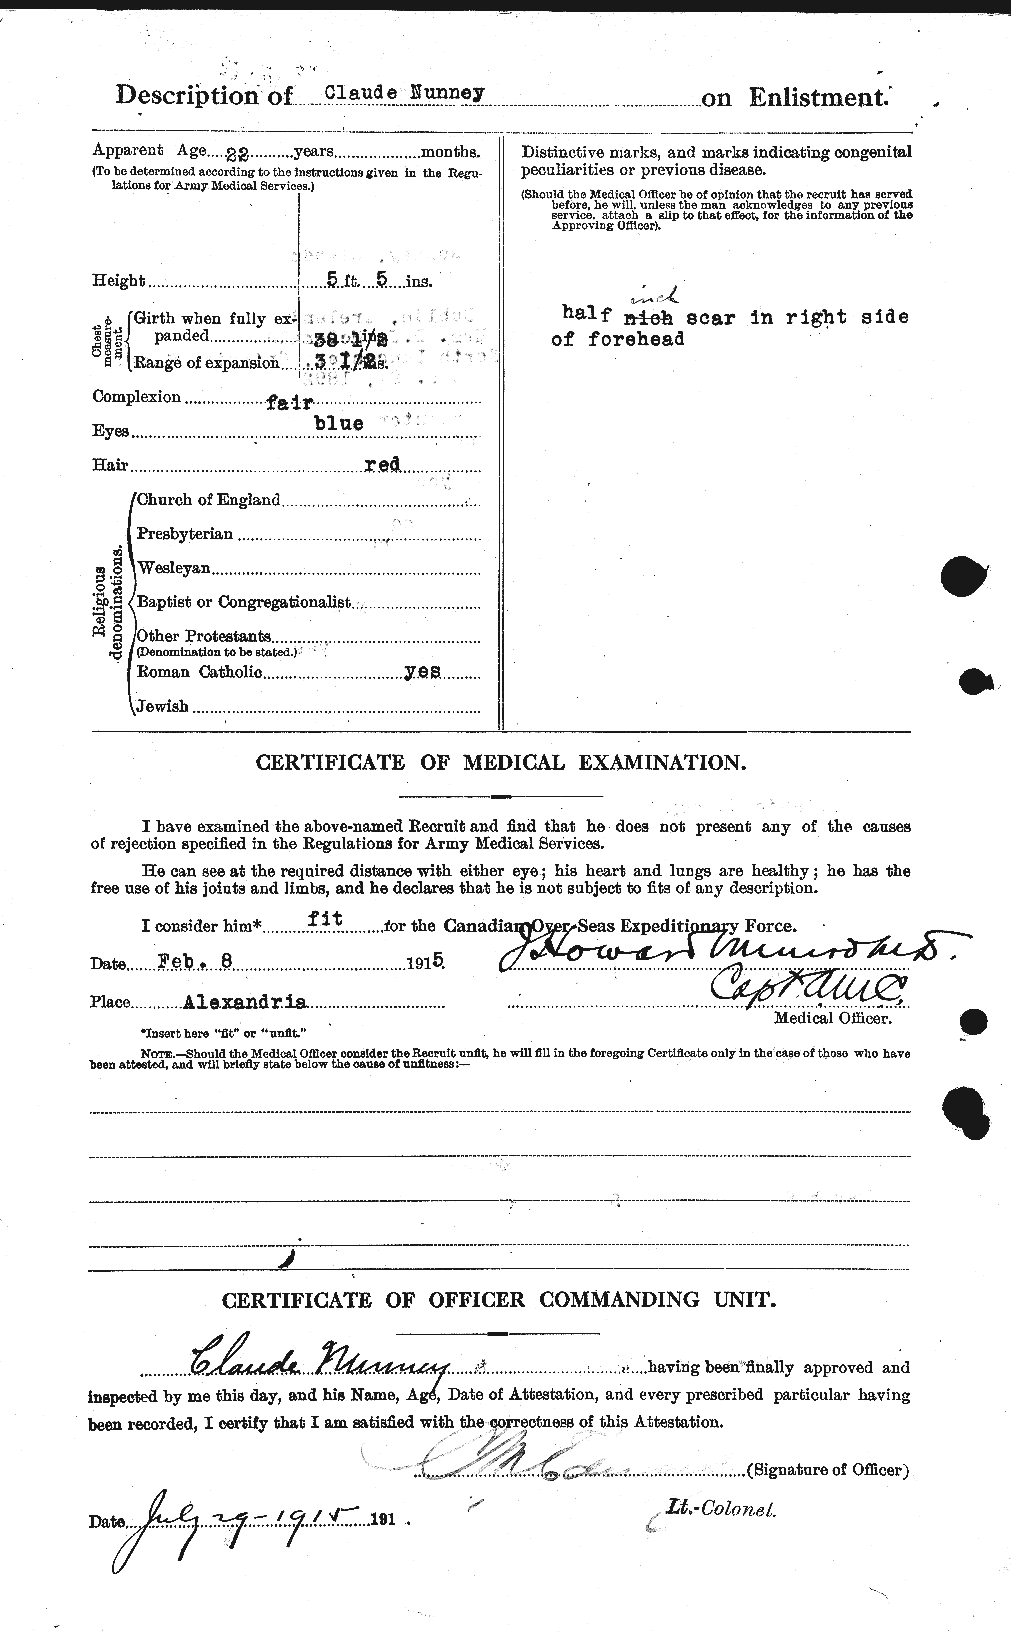 Personnel Records of the First World War - CEF 206299b